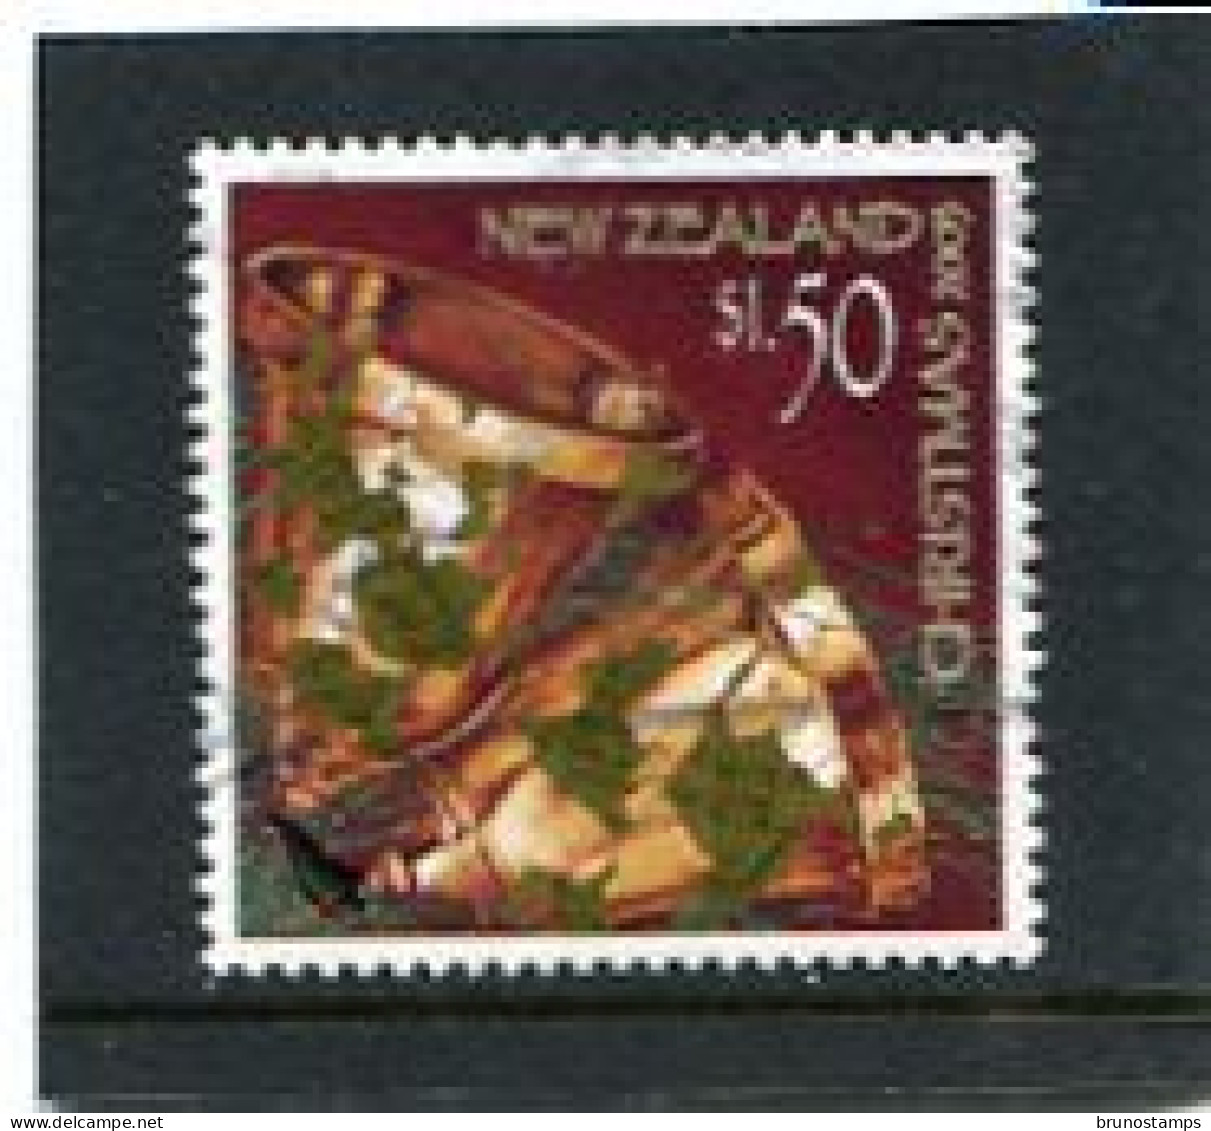 NEW ZEALAND - 2003  1.50$  CHRISTMAS  FINE  USED - Used Stamps